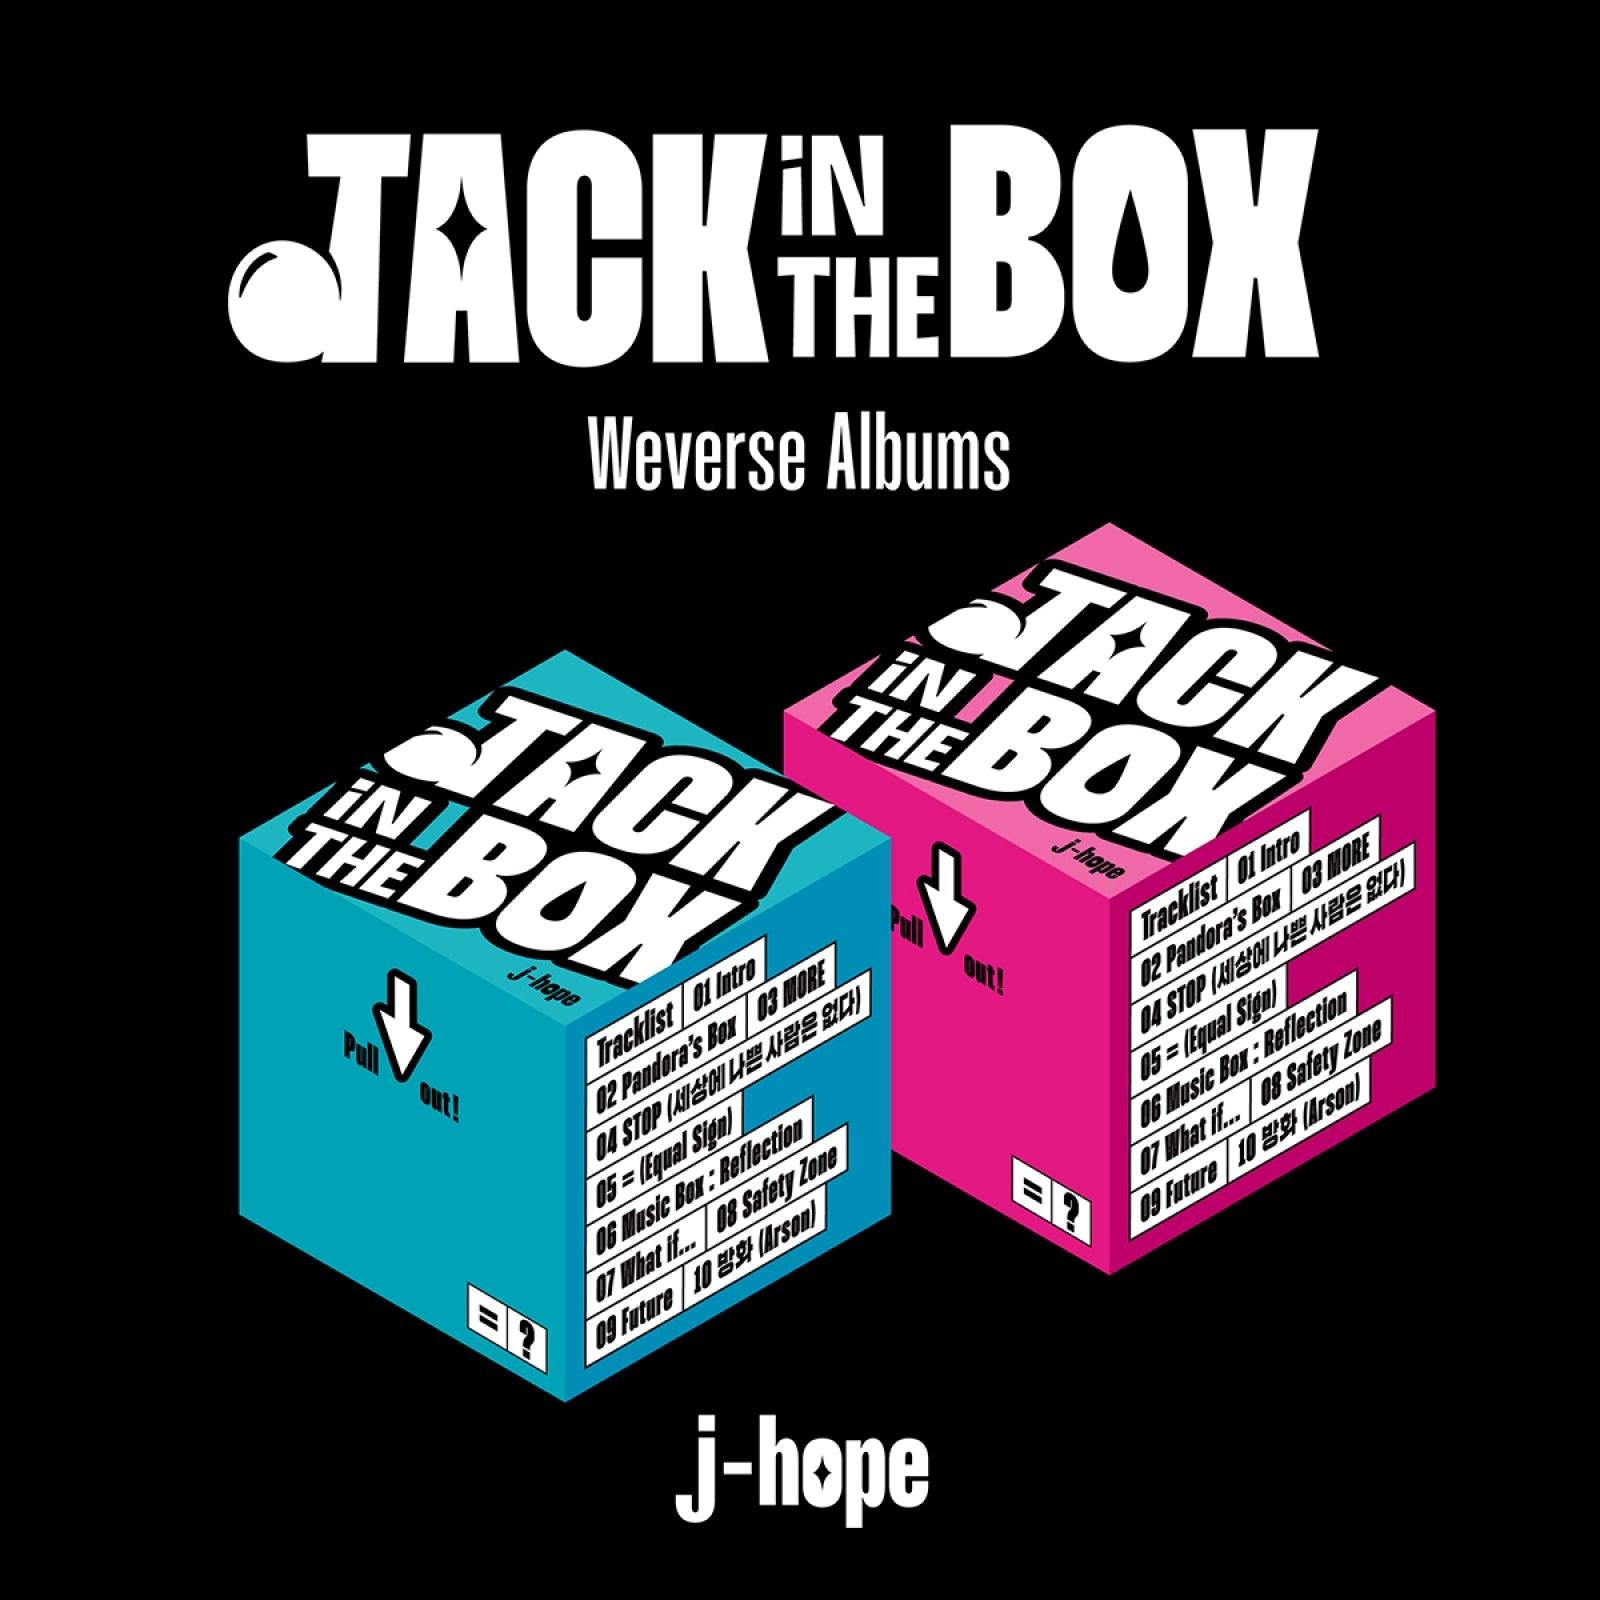 J-hope (BTS) - Jack In The Box (Weverse Albums) - Shopping Around the World with Goodsnjoy